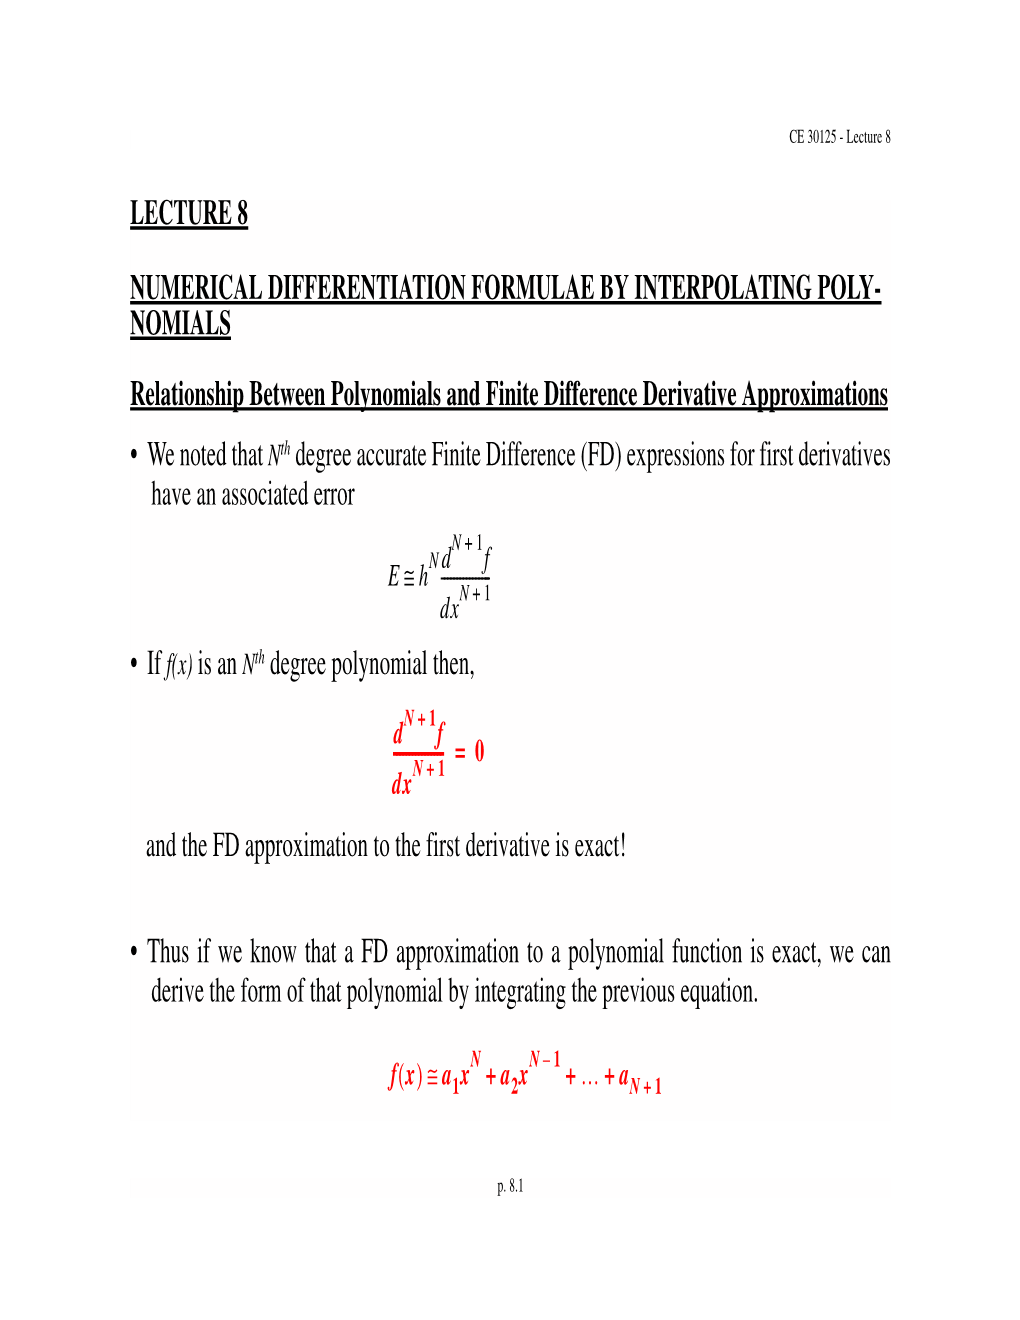 Lecture 8 Numerical Differentiation Formulae By